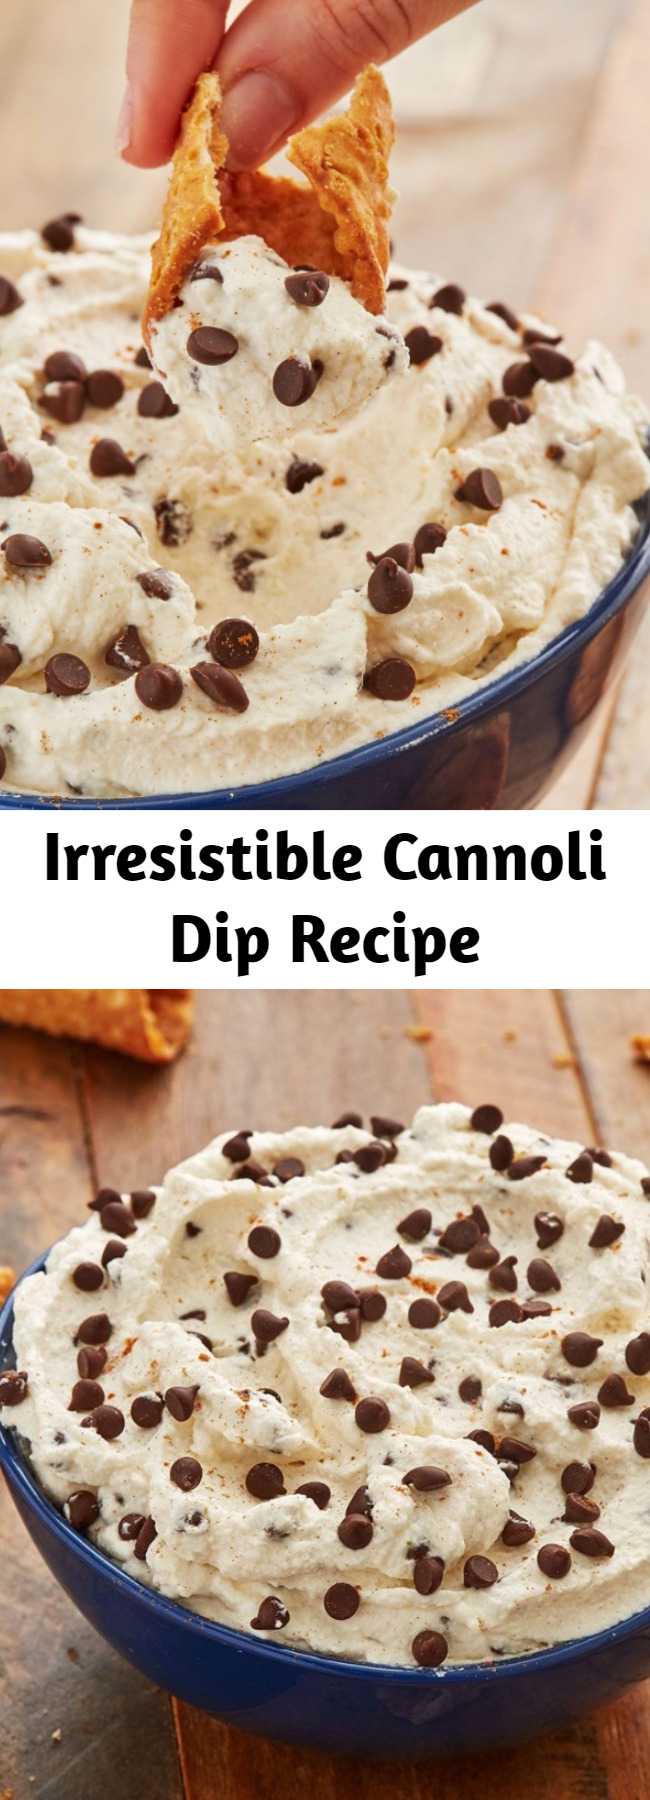 Irresistible Cannoli Dip Recipe - Holy cannoli, this dip is delicious! Here's how to make this easy and quick dessert dip for any holiday party.